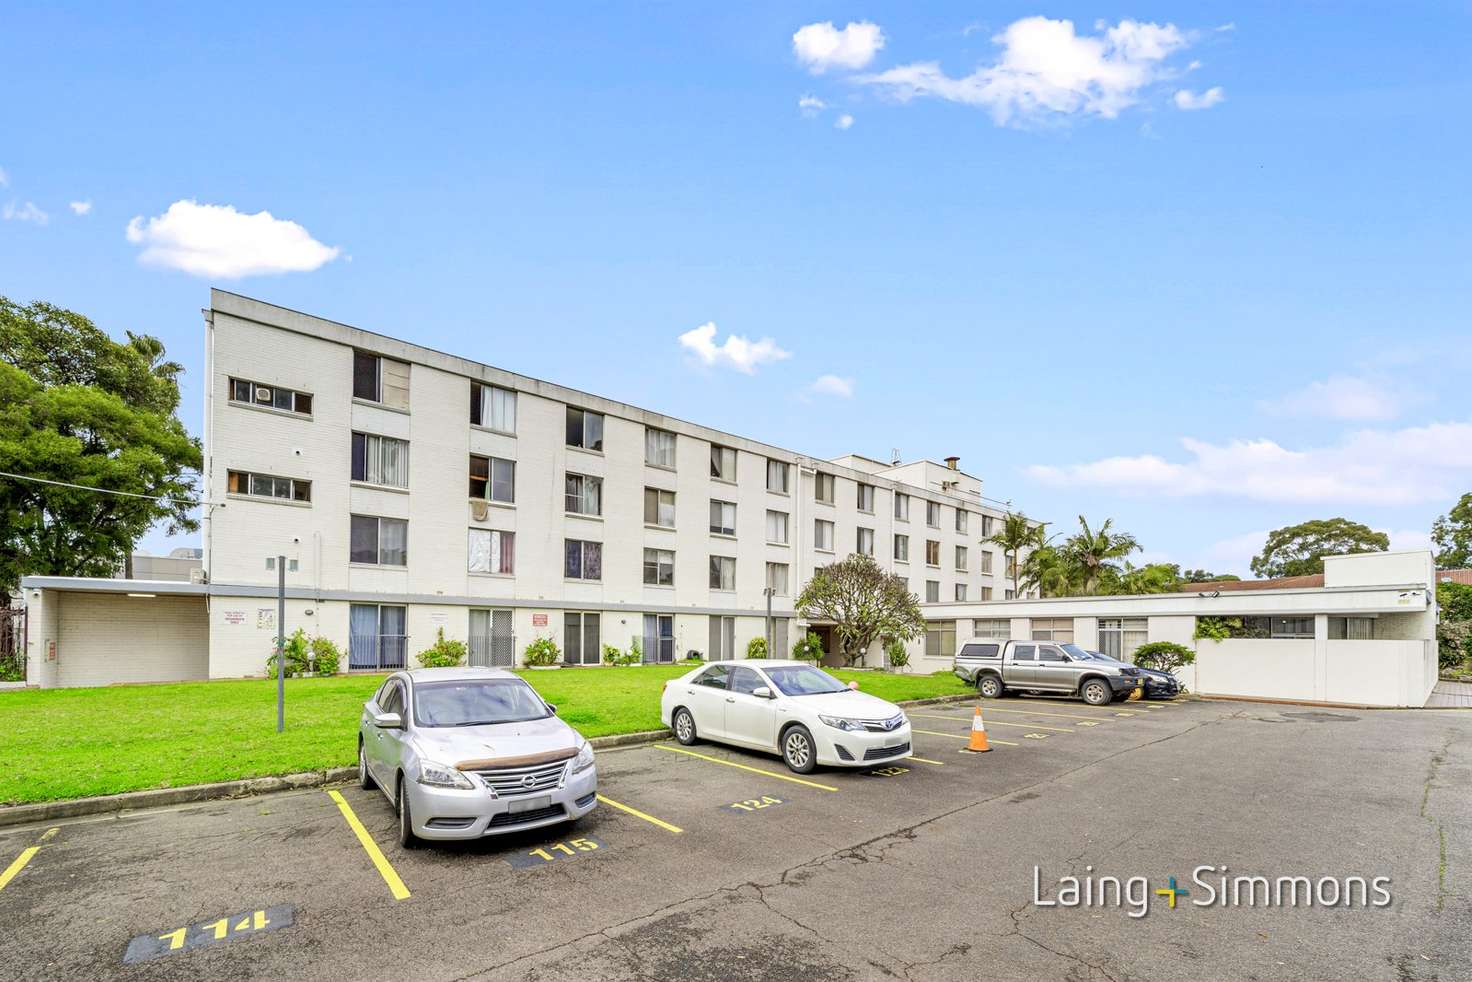 Main view of Homely apartment listing, 341/95 Station Rd, Auburn NSW 2144